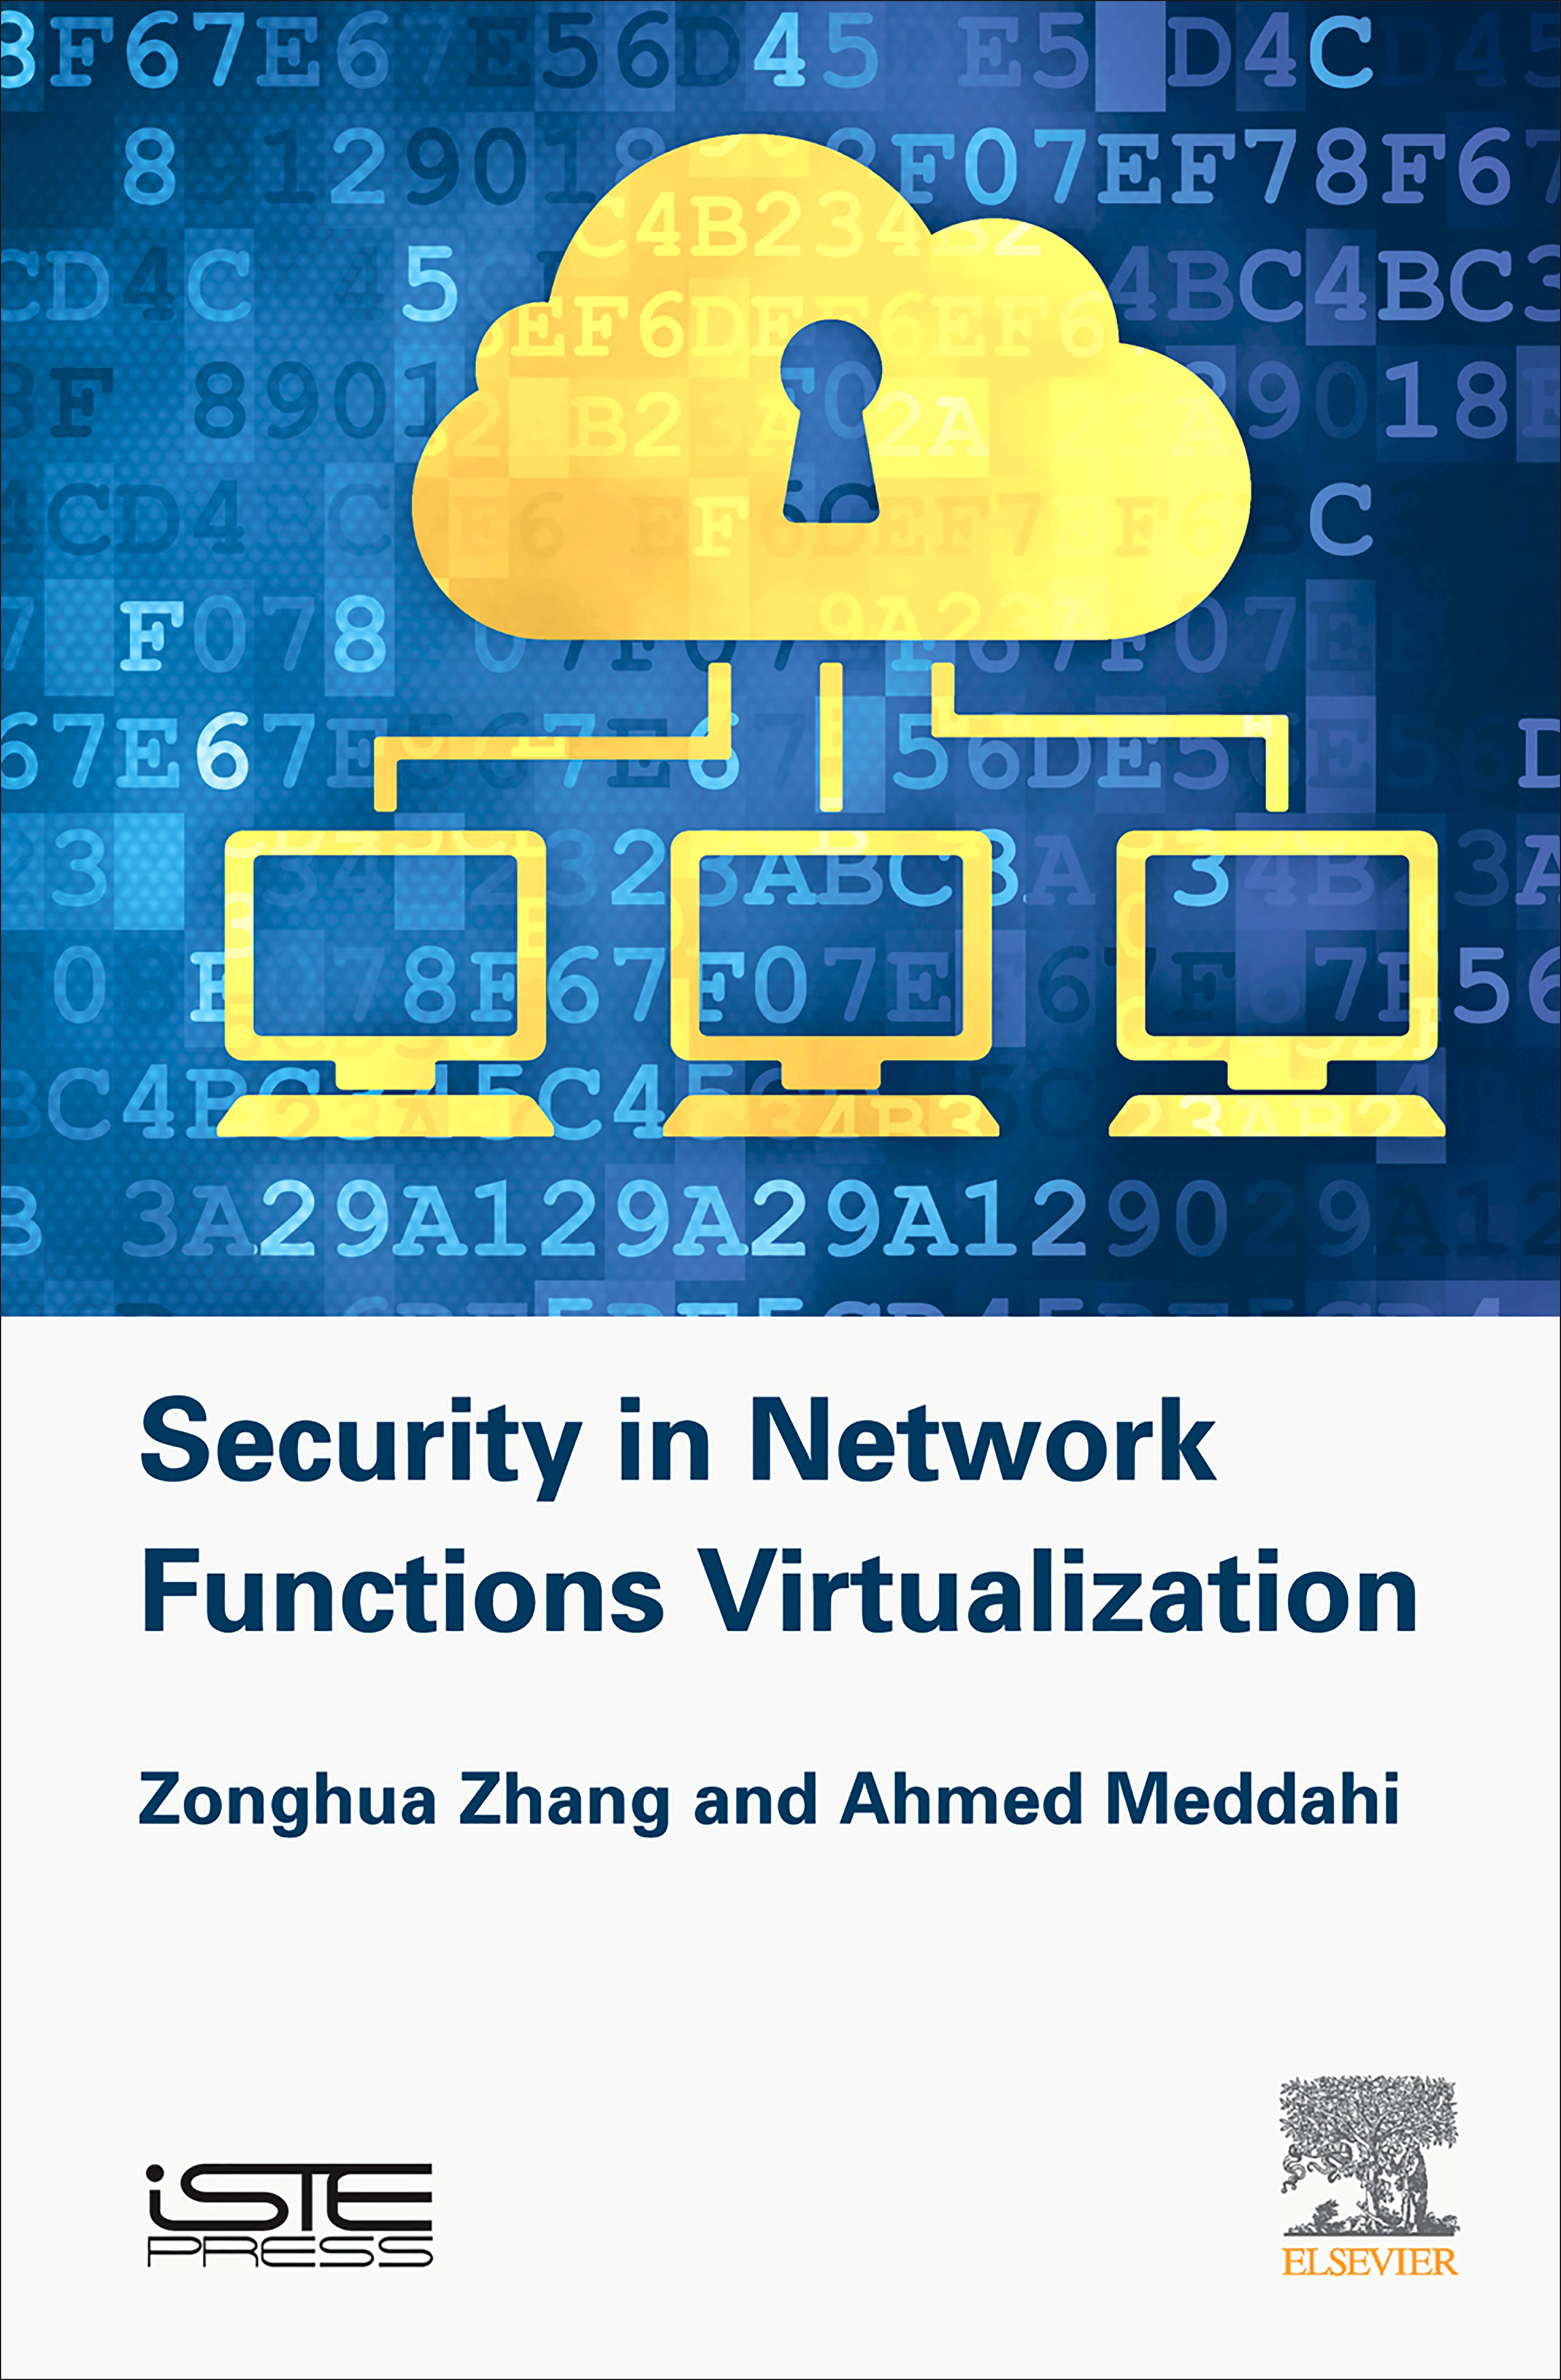 Security in Network Functions Virtualization